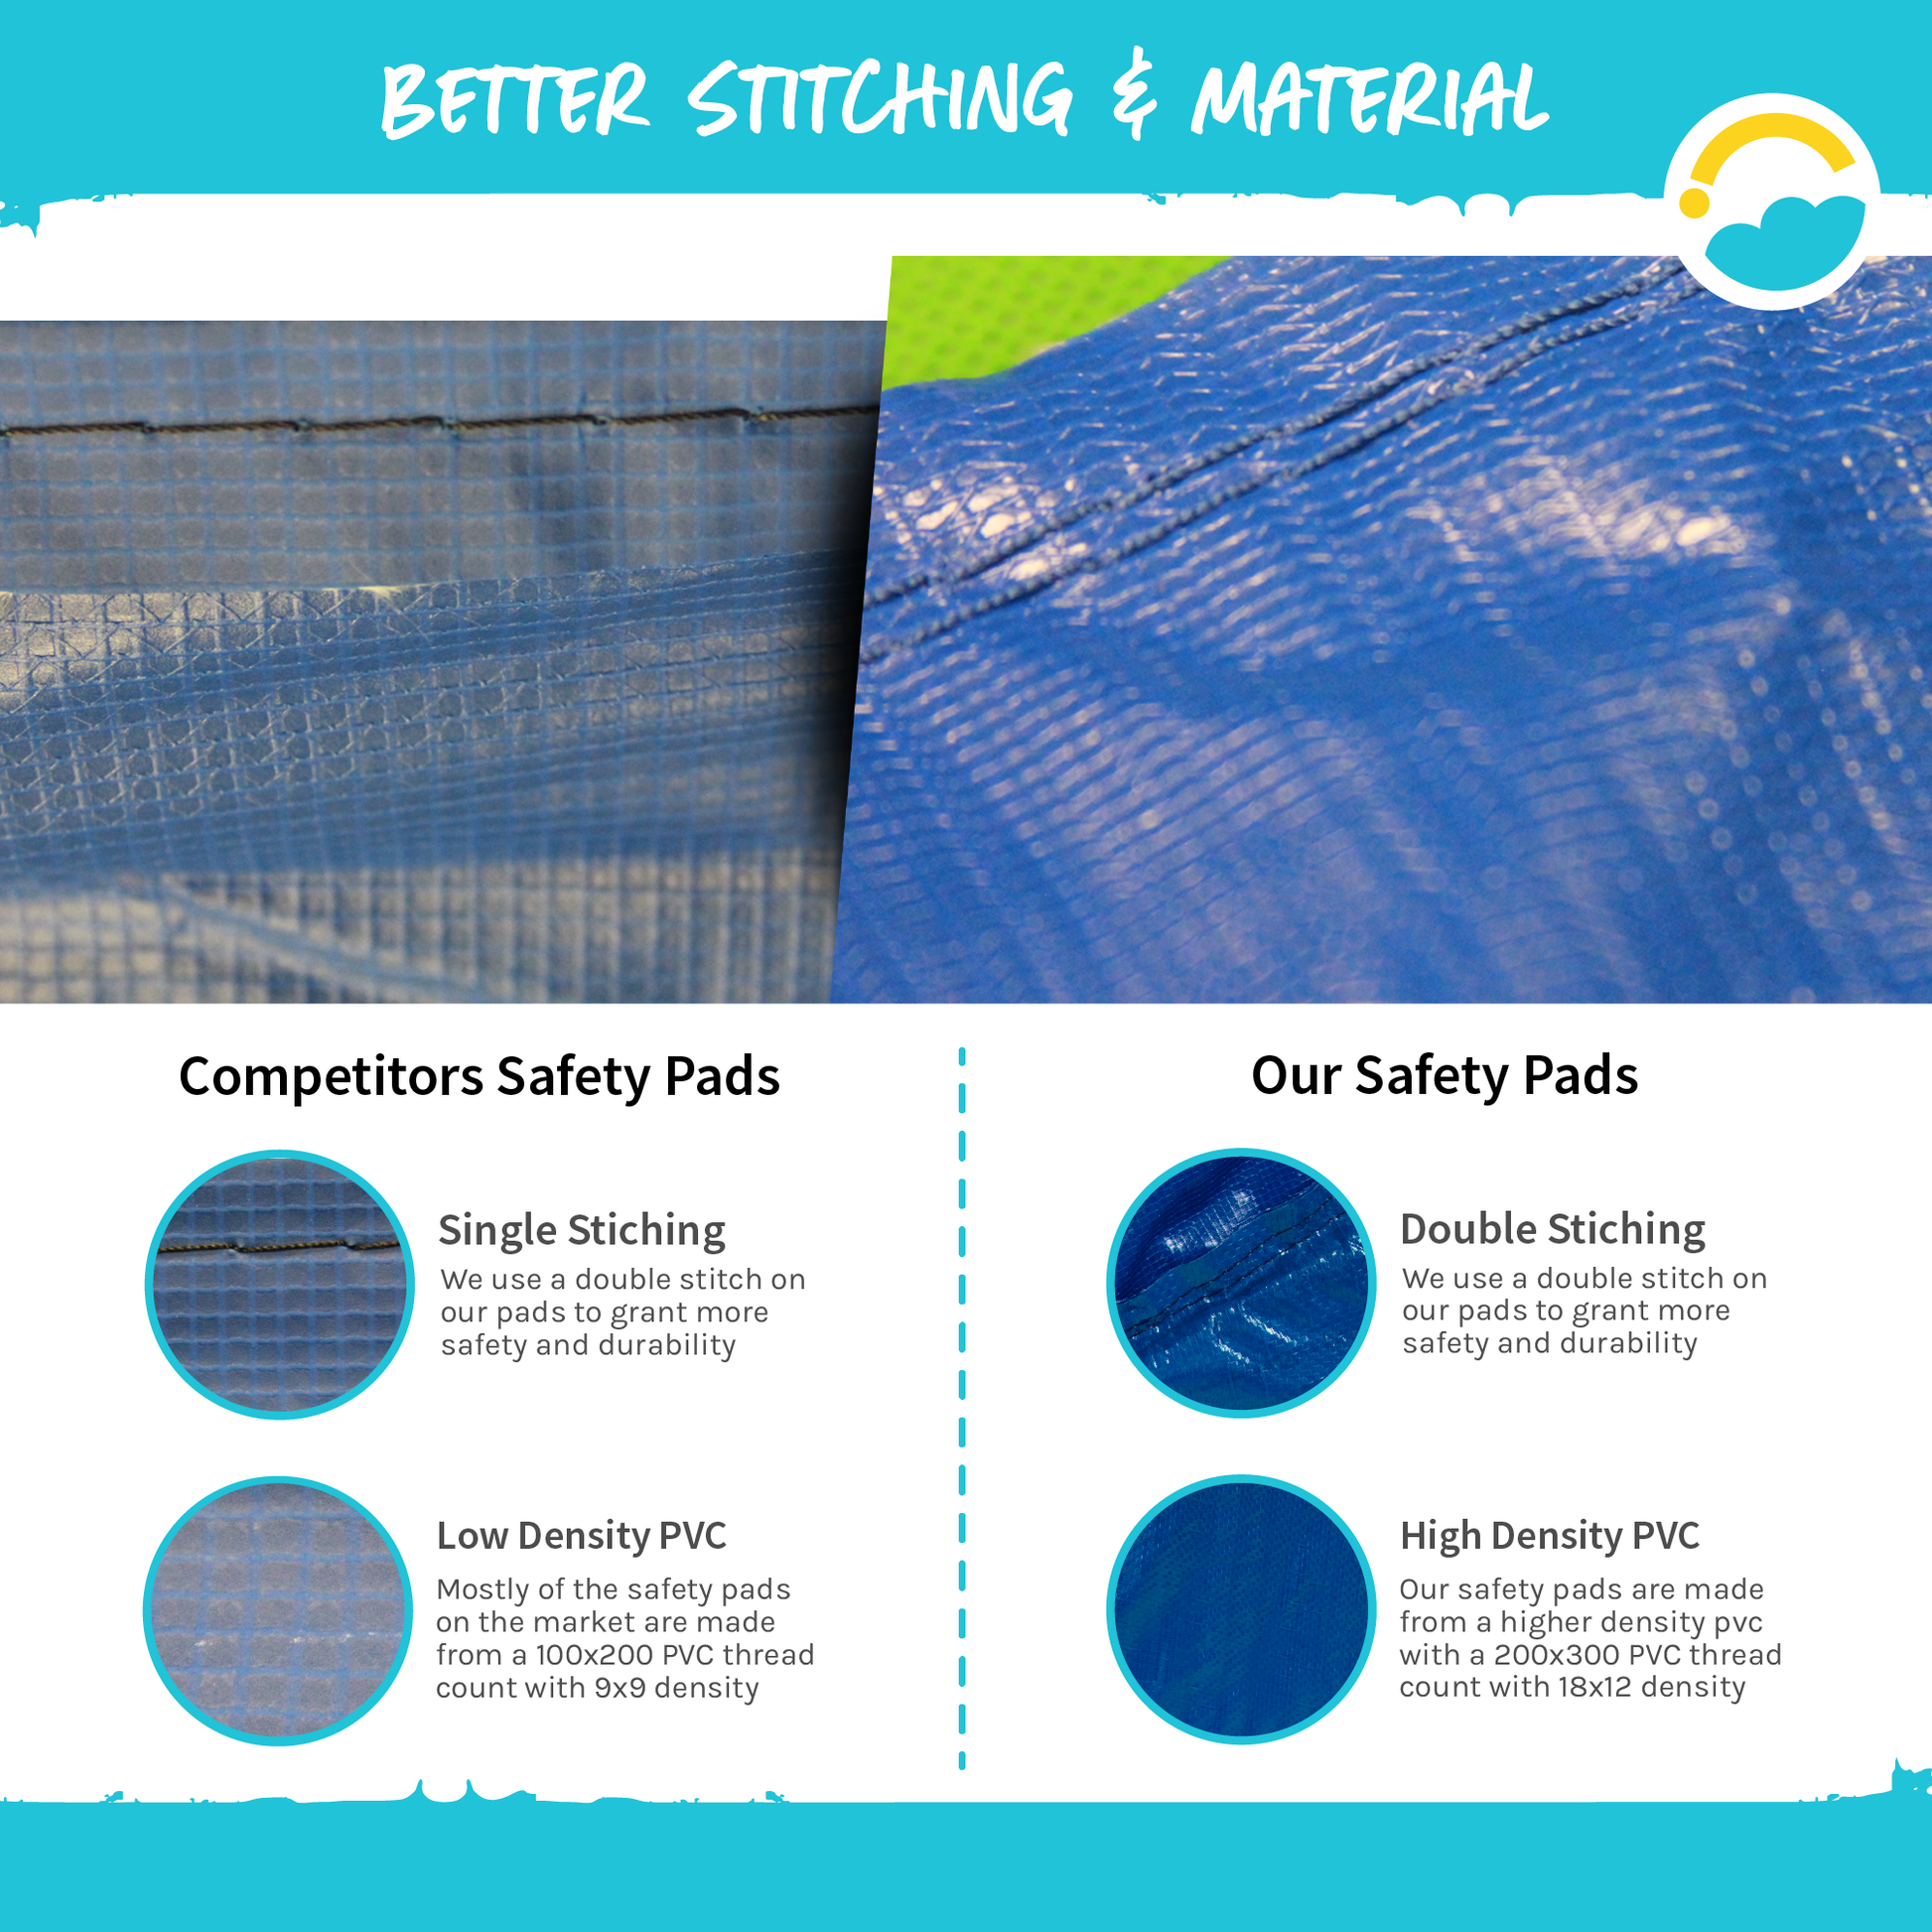 A comparison between Competitor Safety Pad and SkyBound USA safety pad. Competitor pad: Single Stitching and Low-Density PVC (100x200 thread count and 9x9 density). SkyBound USA Safety Pads: Double Stitching and High-Density PVC (200x300 threat count and 18x12 density).